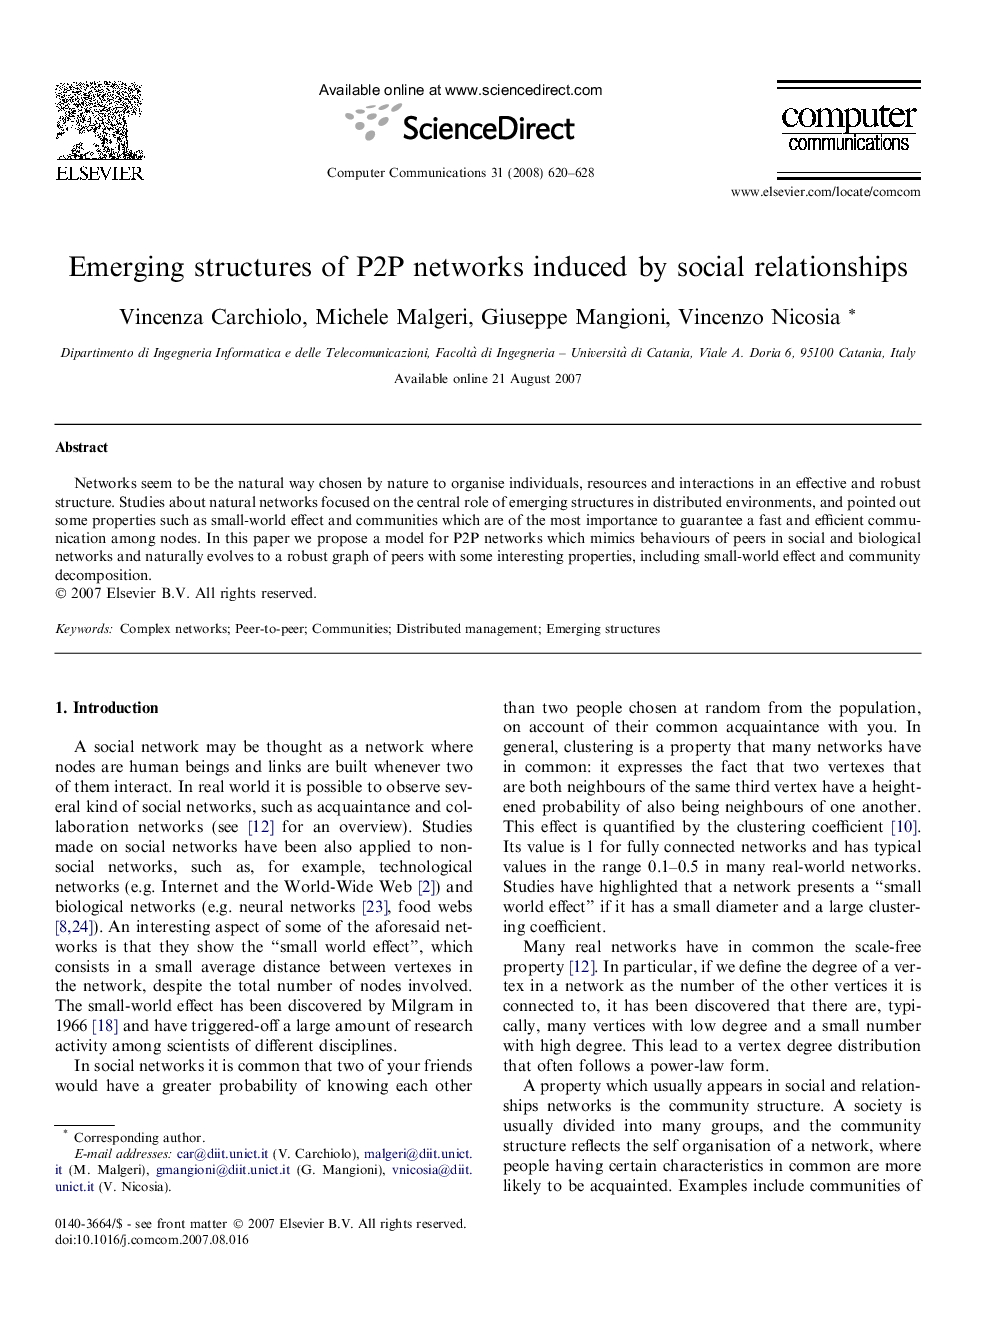 Emerging structures of P2P networks induced by social relationships